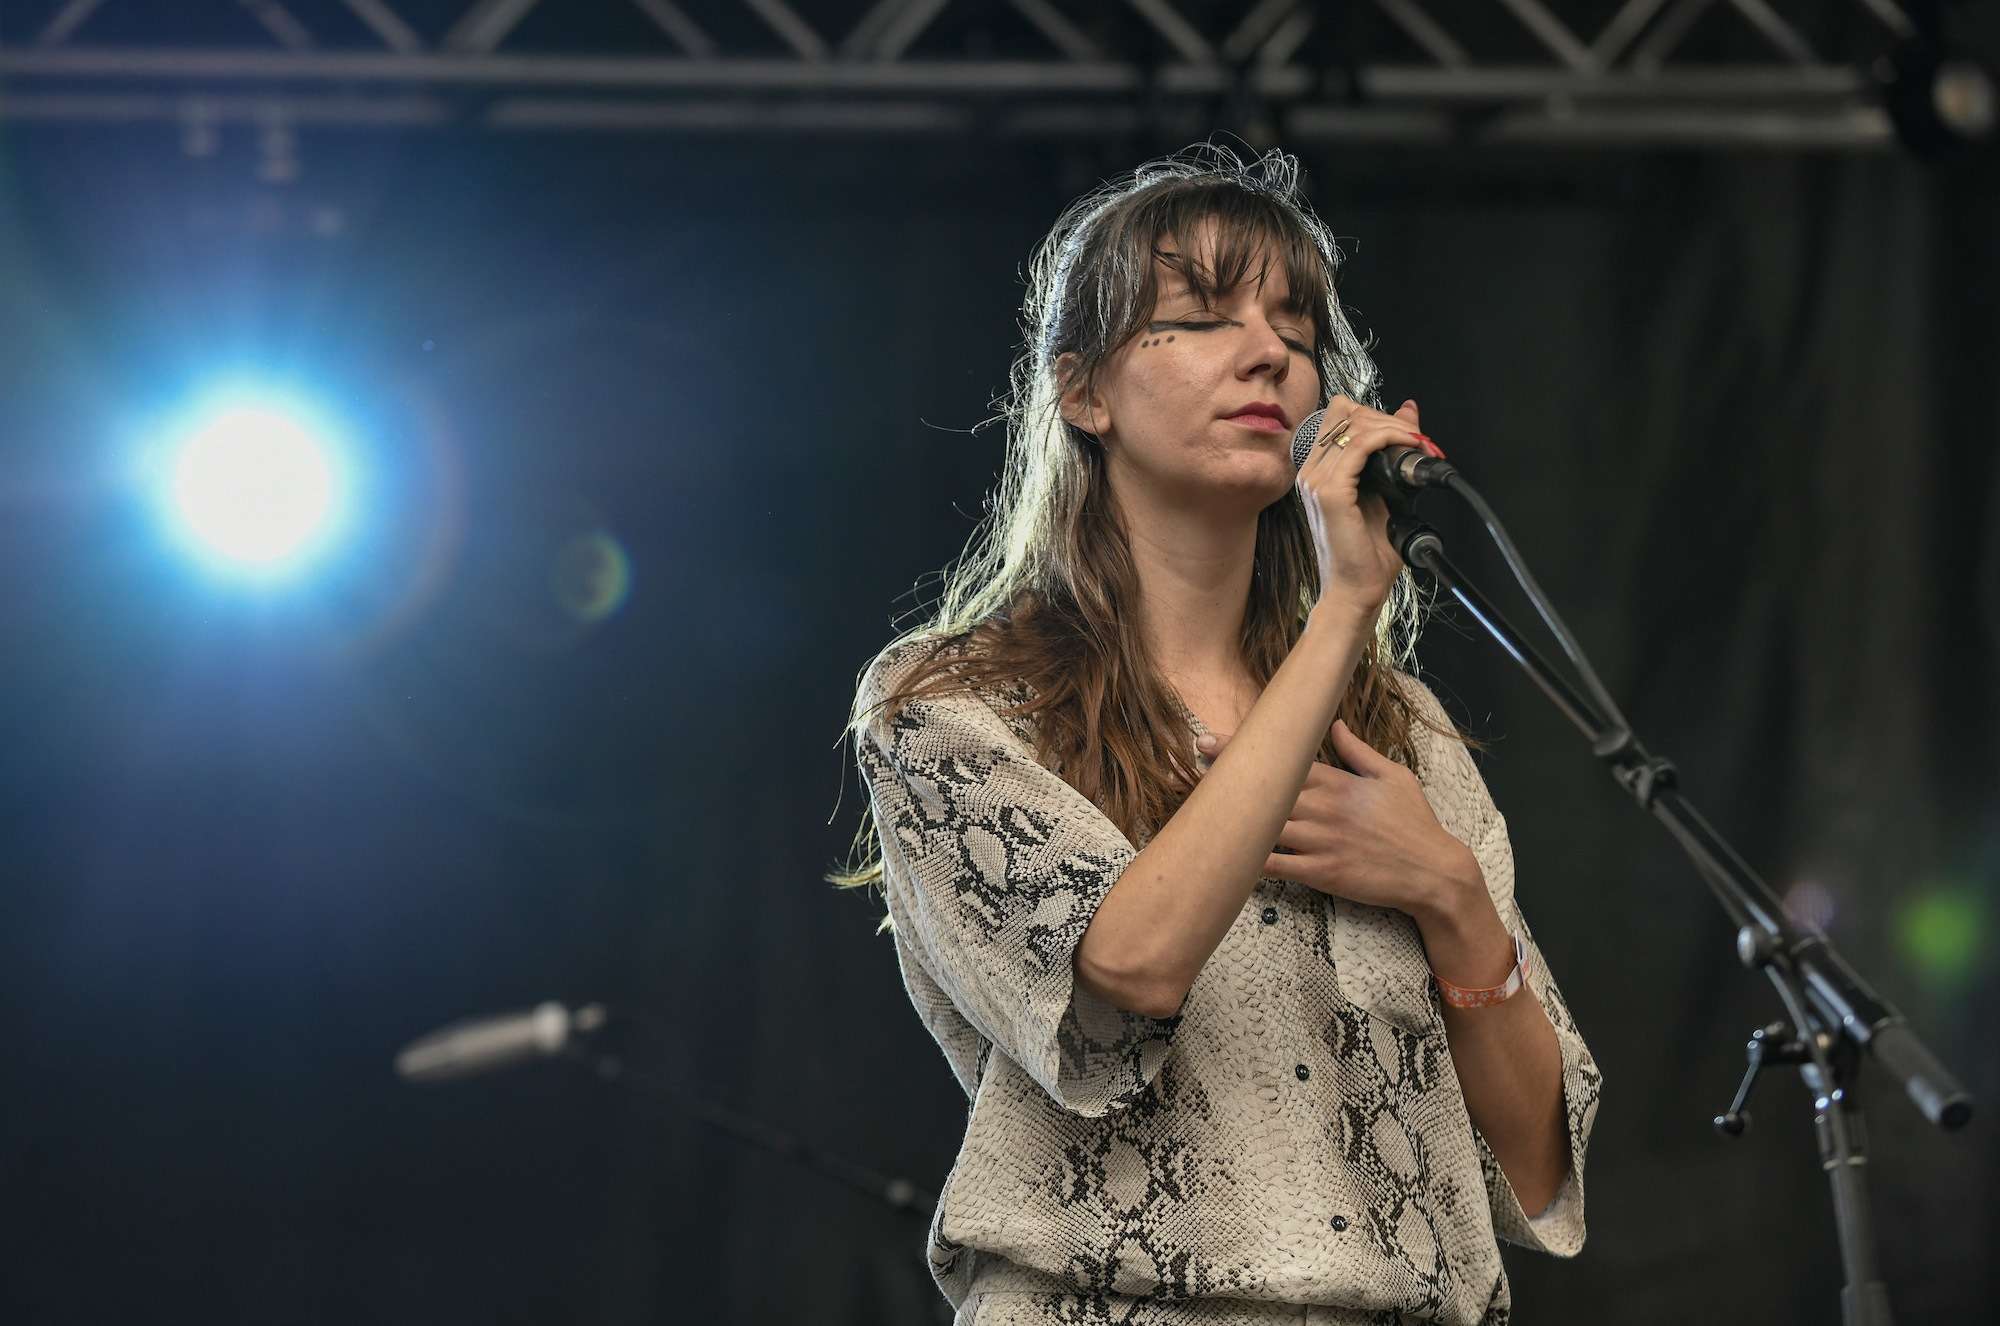 Circuit des Yeux Live at Pitchfork [GALLERY] 8